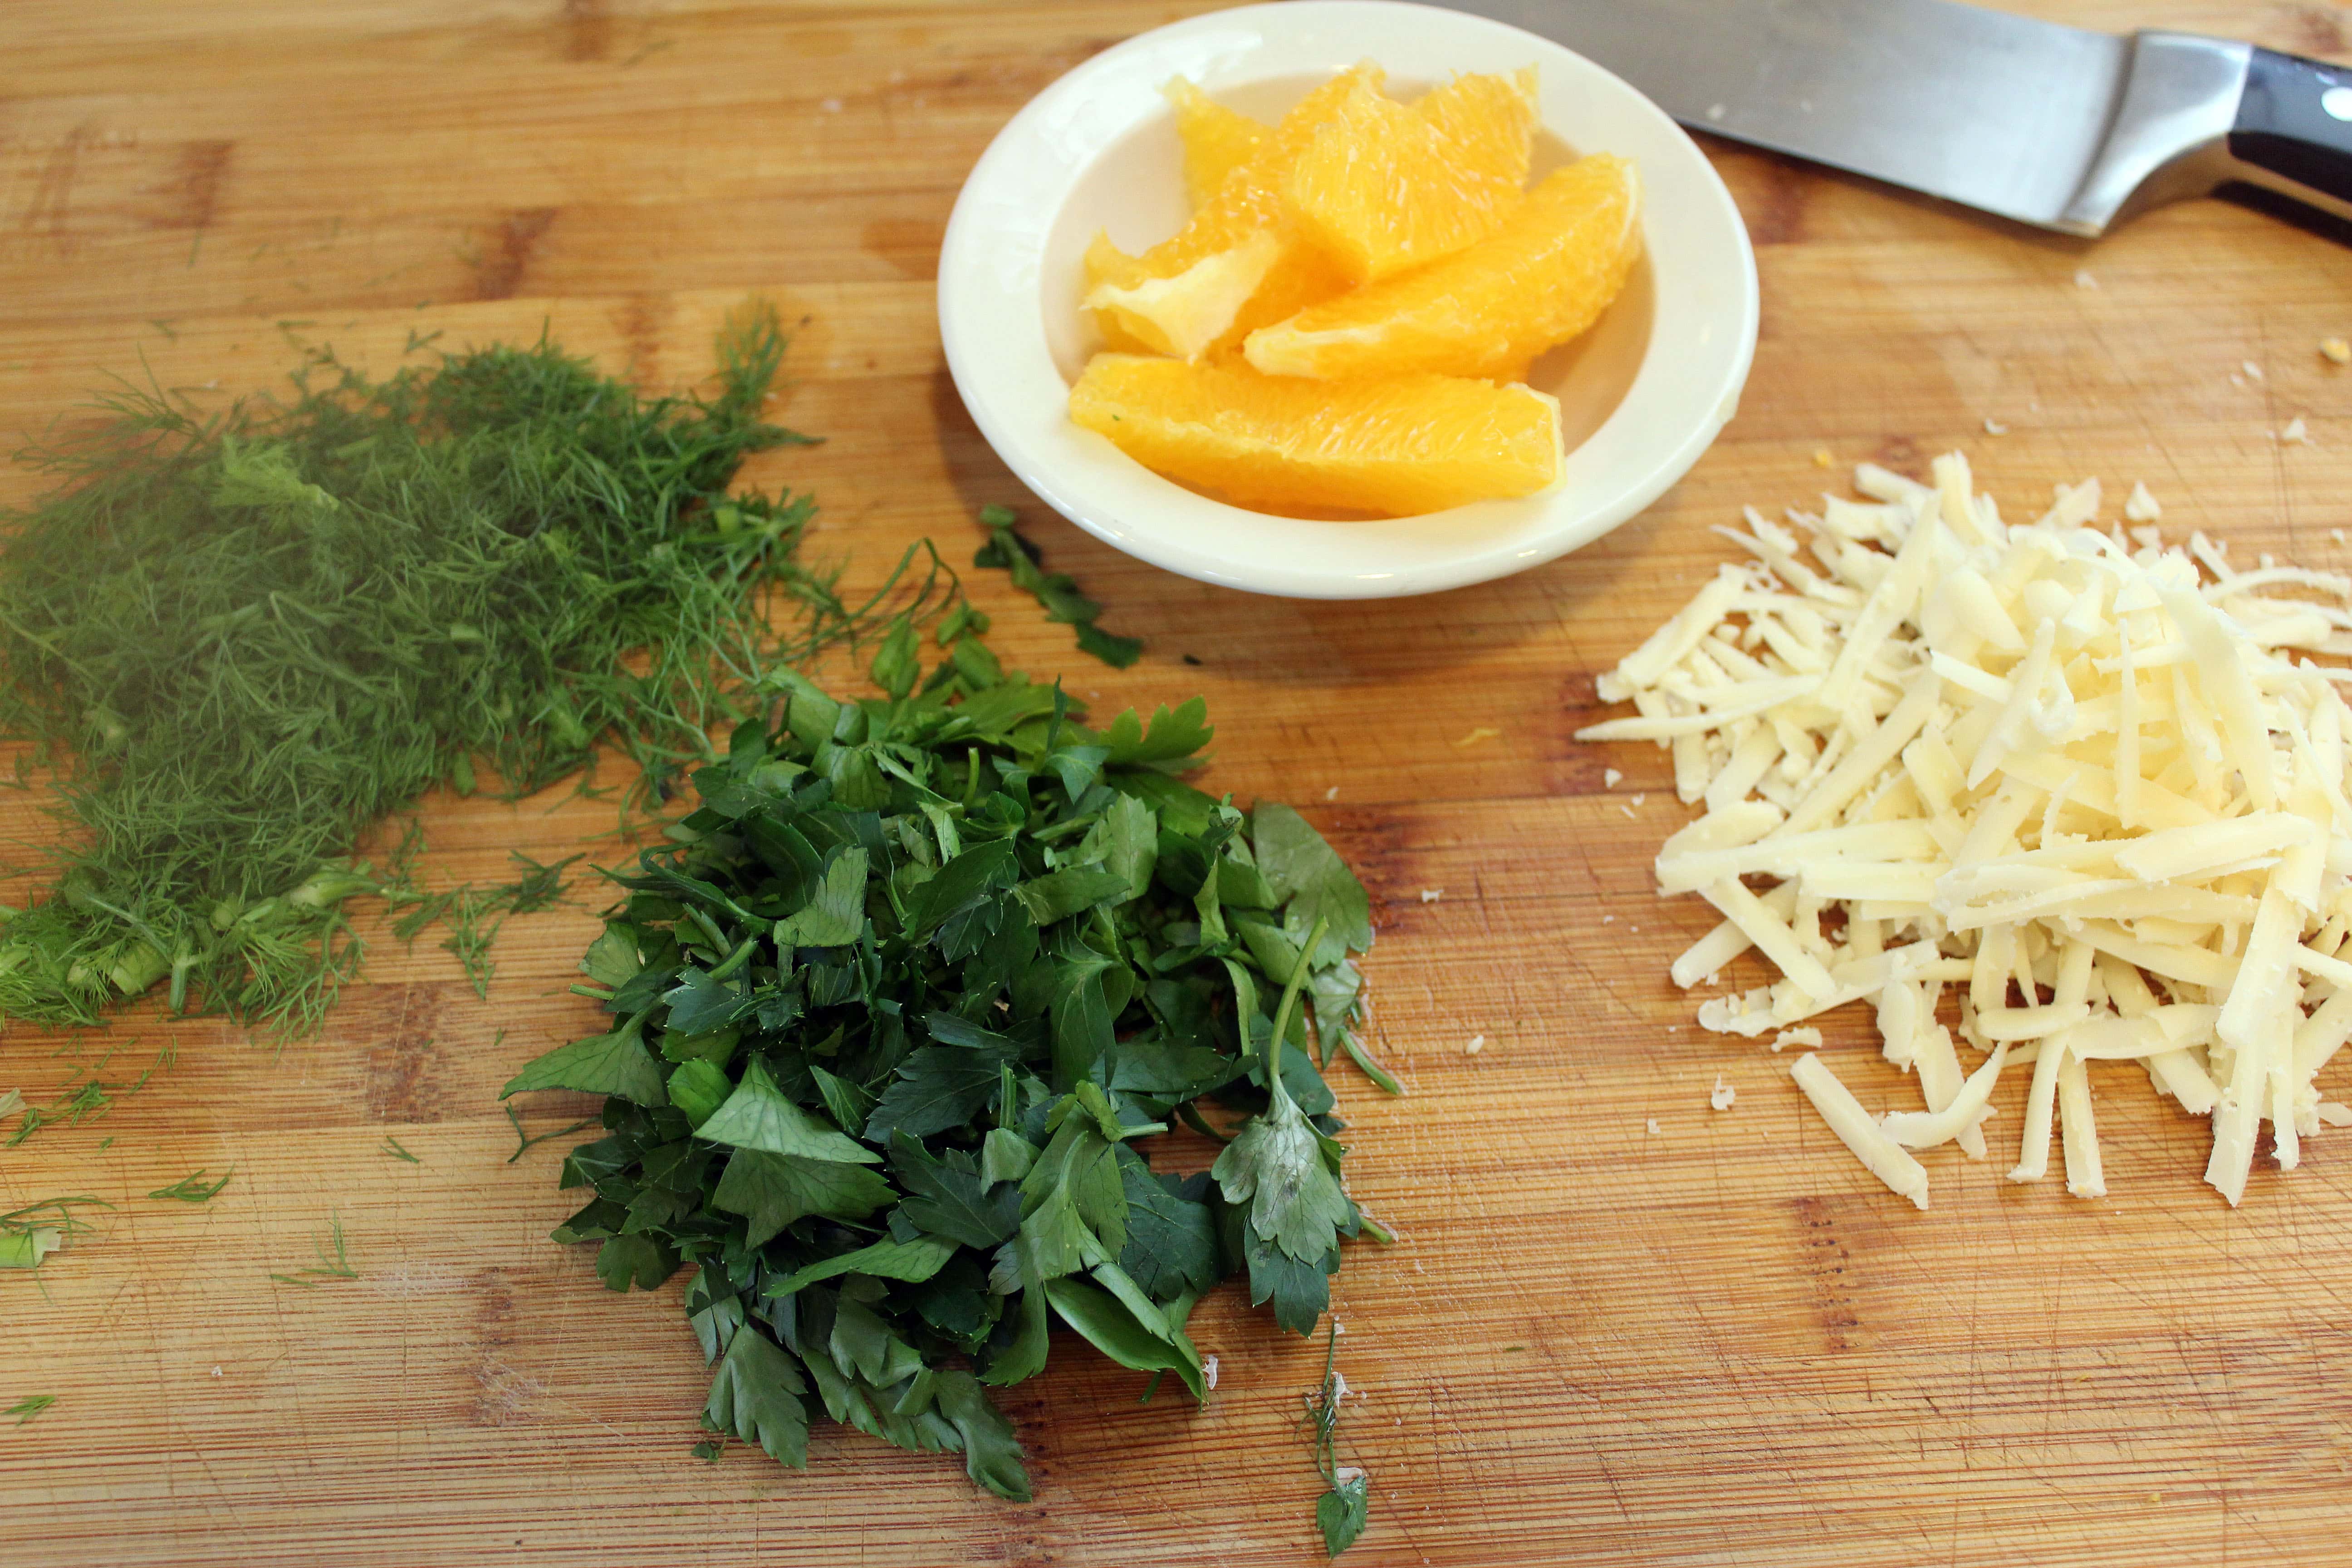 Topping and sauce ingredients